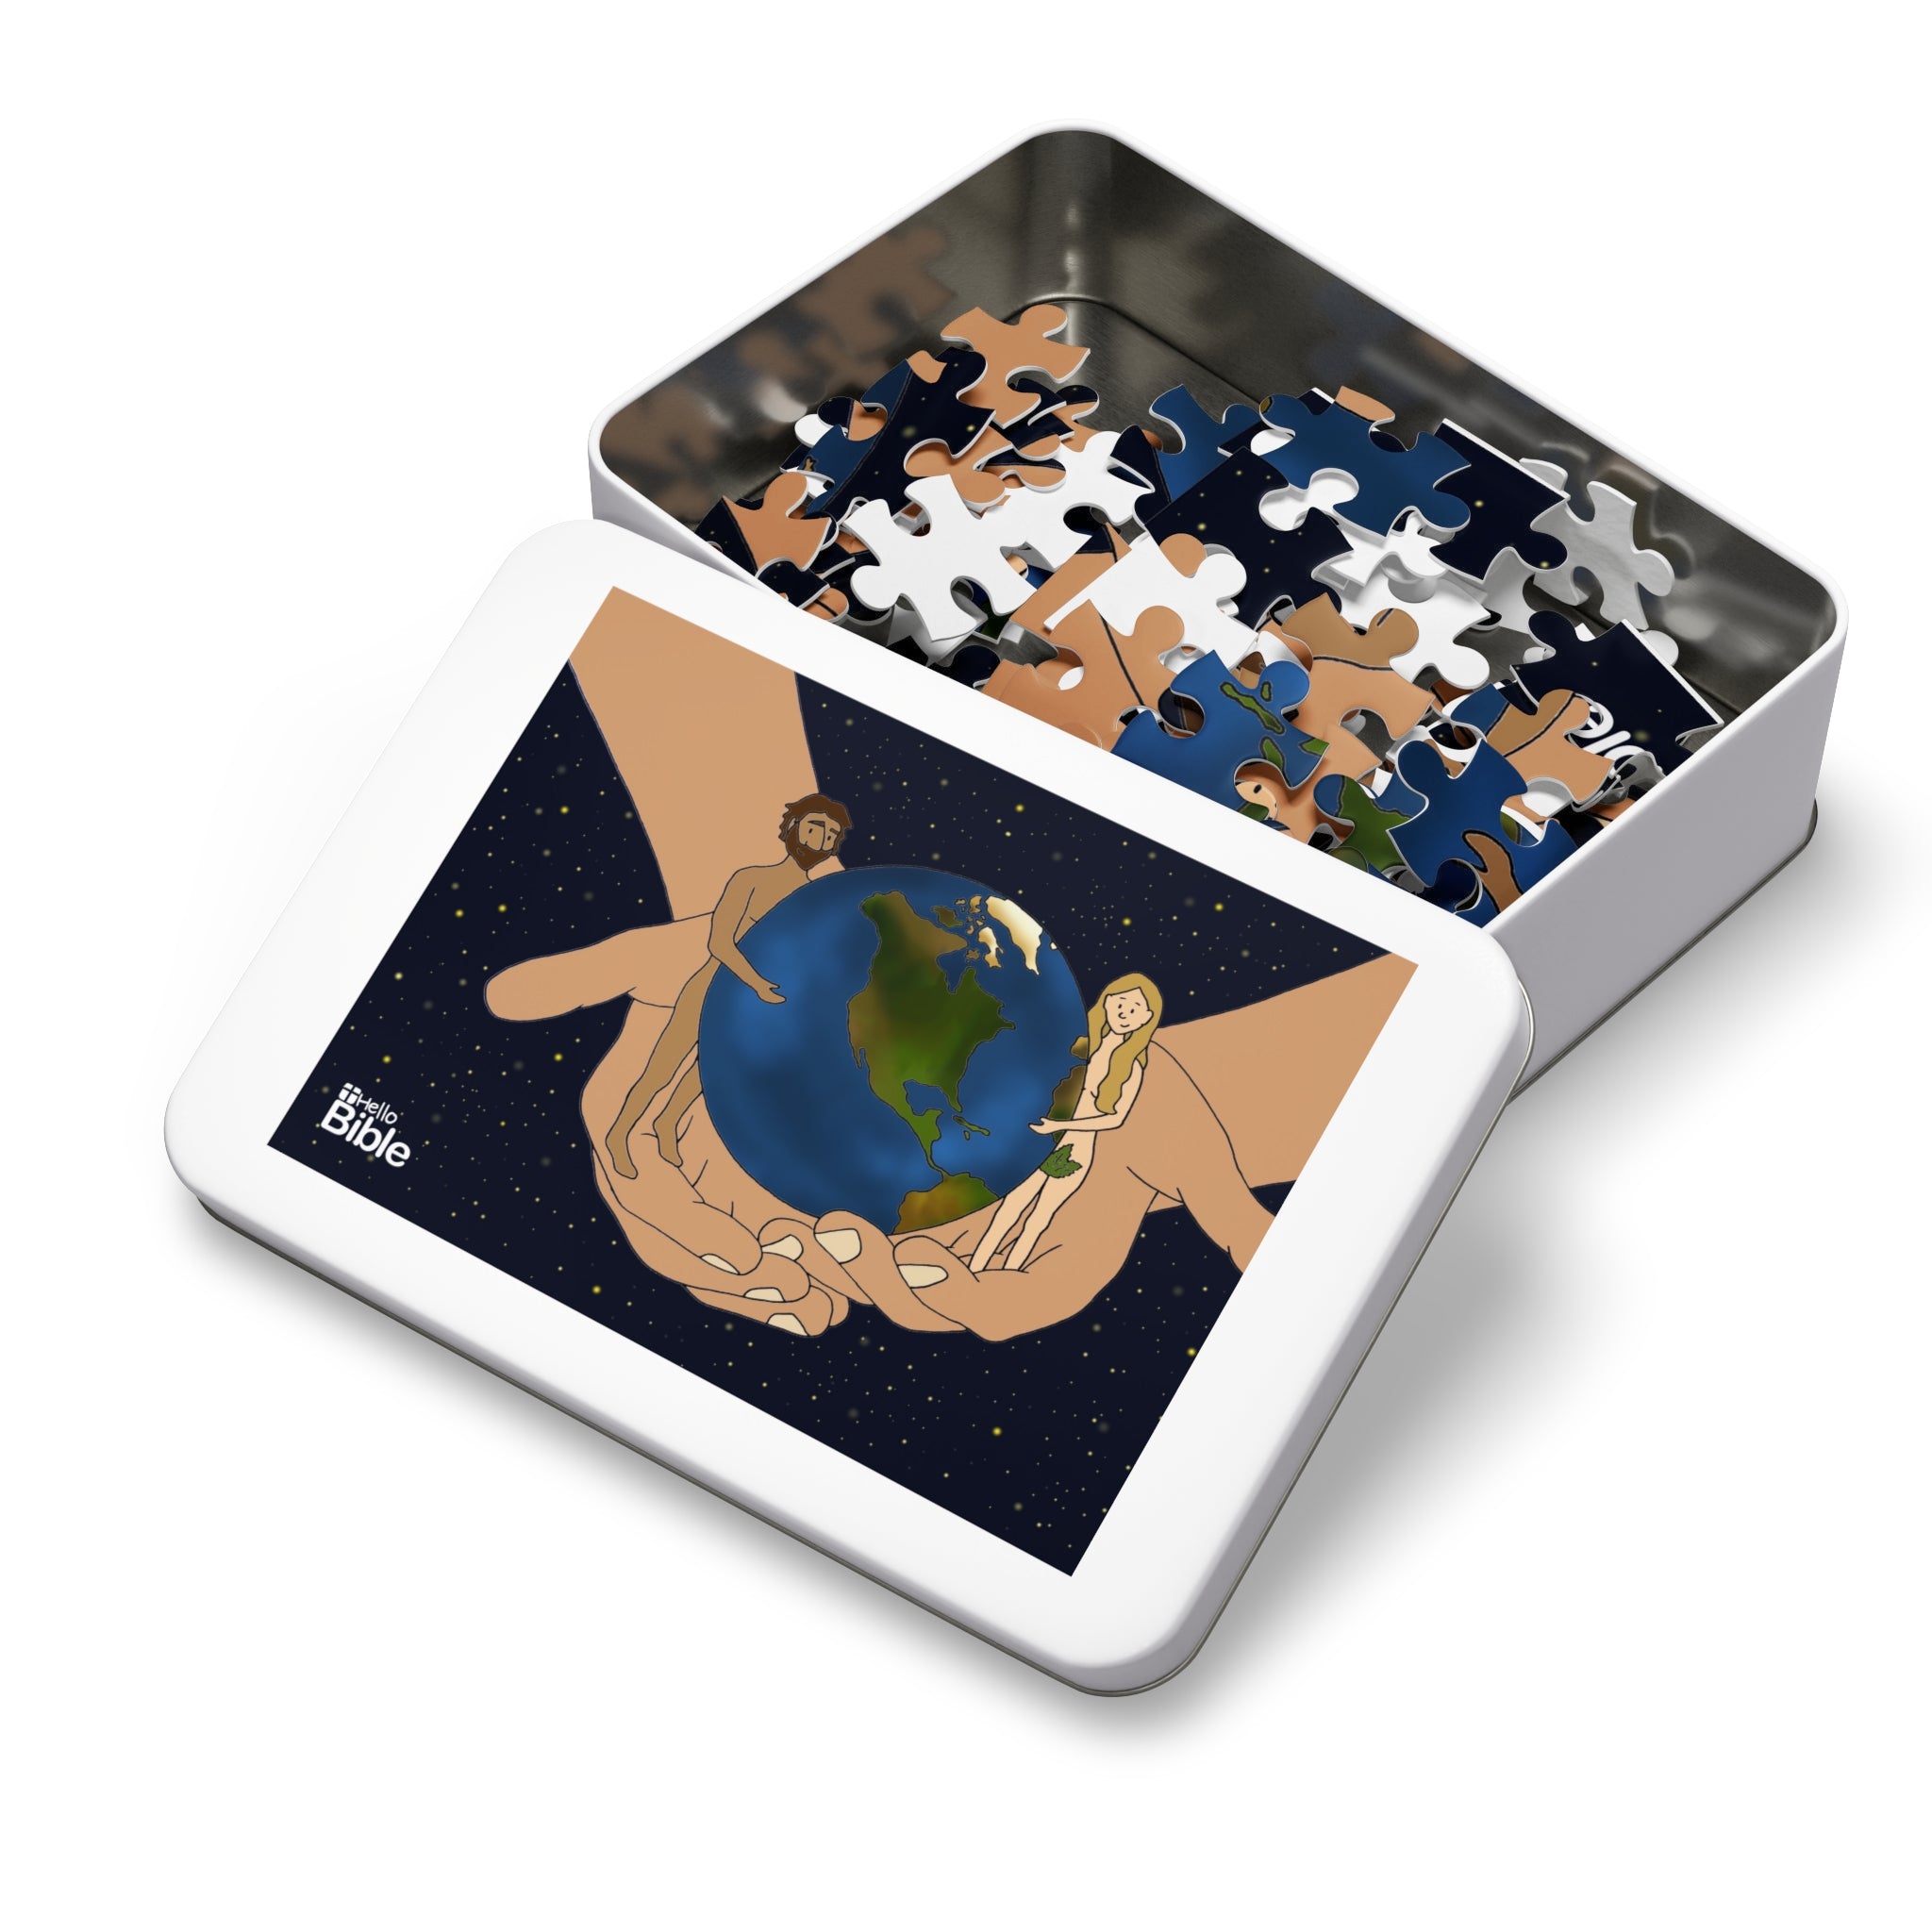 HelloBible Creation Jigsaw Puzzle